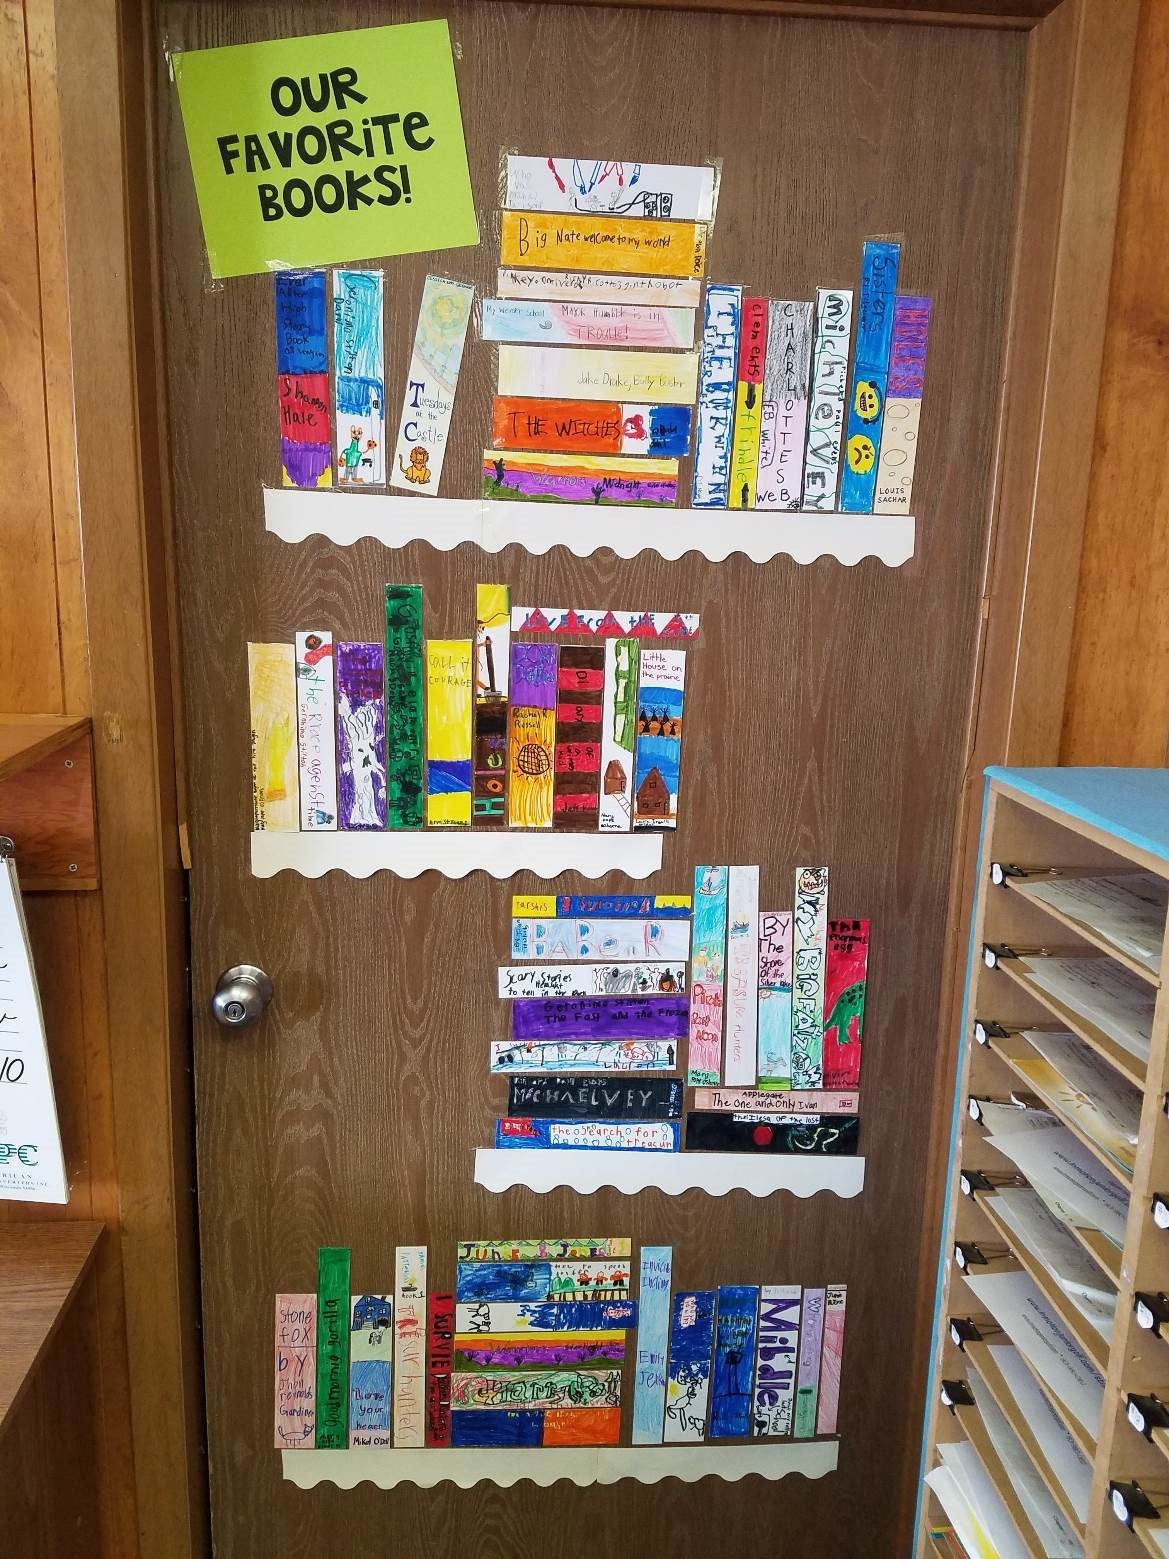 Students favorite books posted on a bulletin board